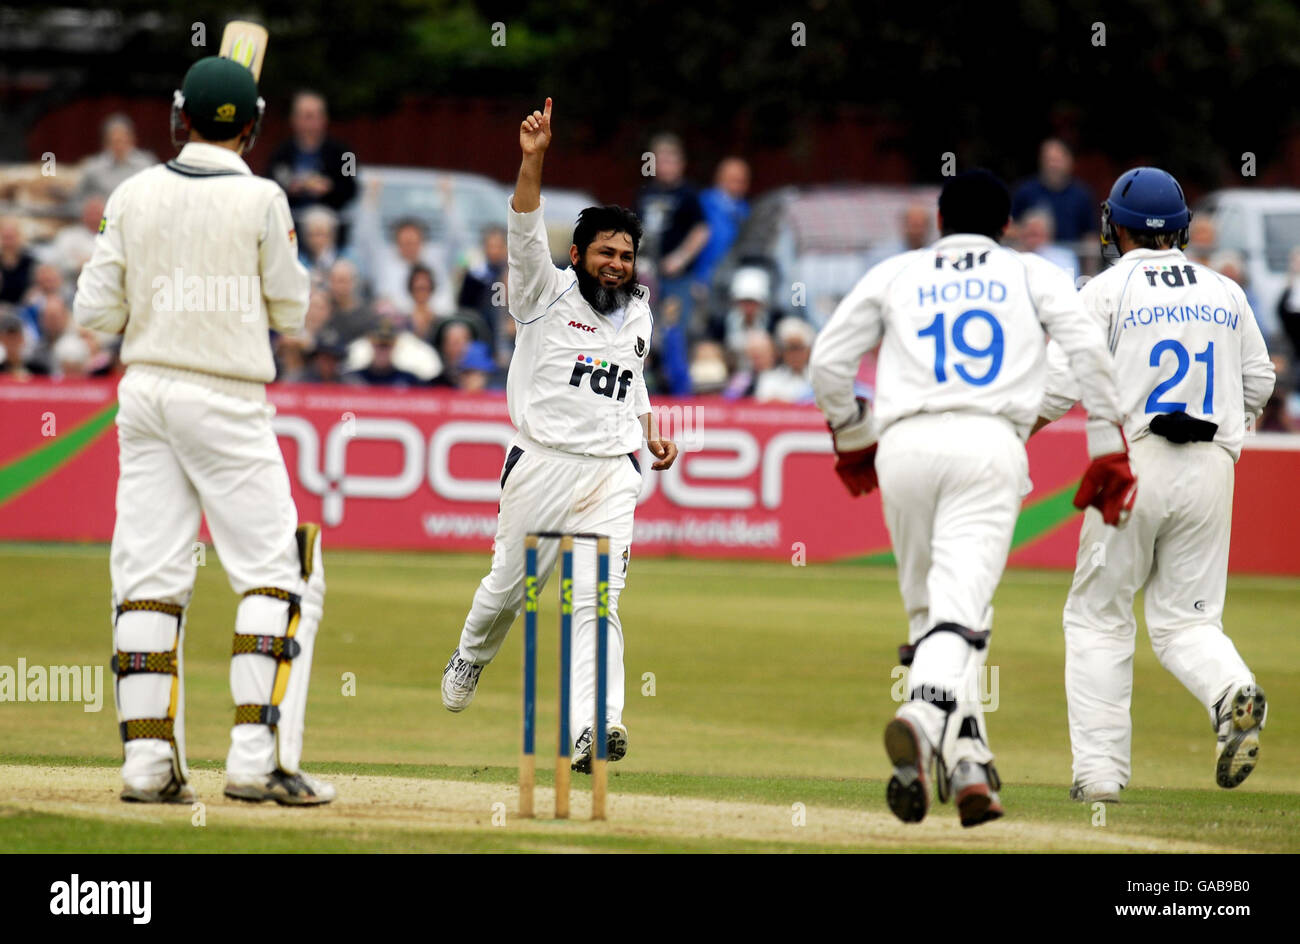 Sussex's Mushtaq Ahmed celebrates taking the wicket of Worcestershire's Nadeem Malik during the Liverpool Victoria County Championship Division One match at the County Cricket Ground, Hove. Stock Photo